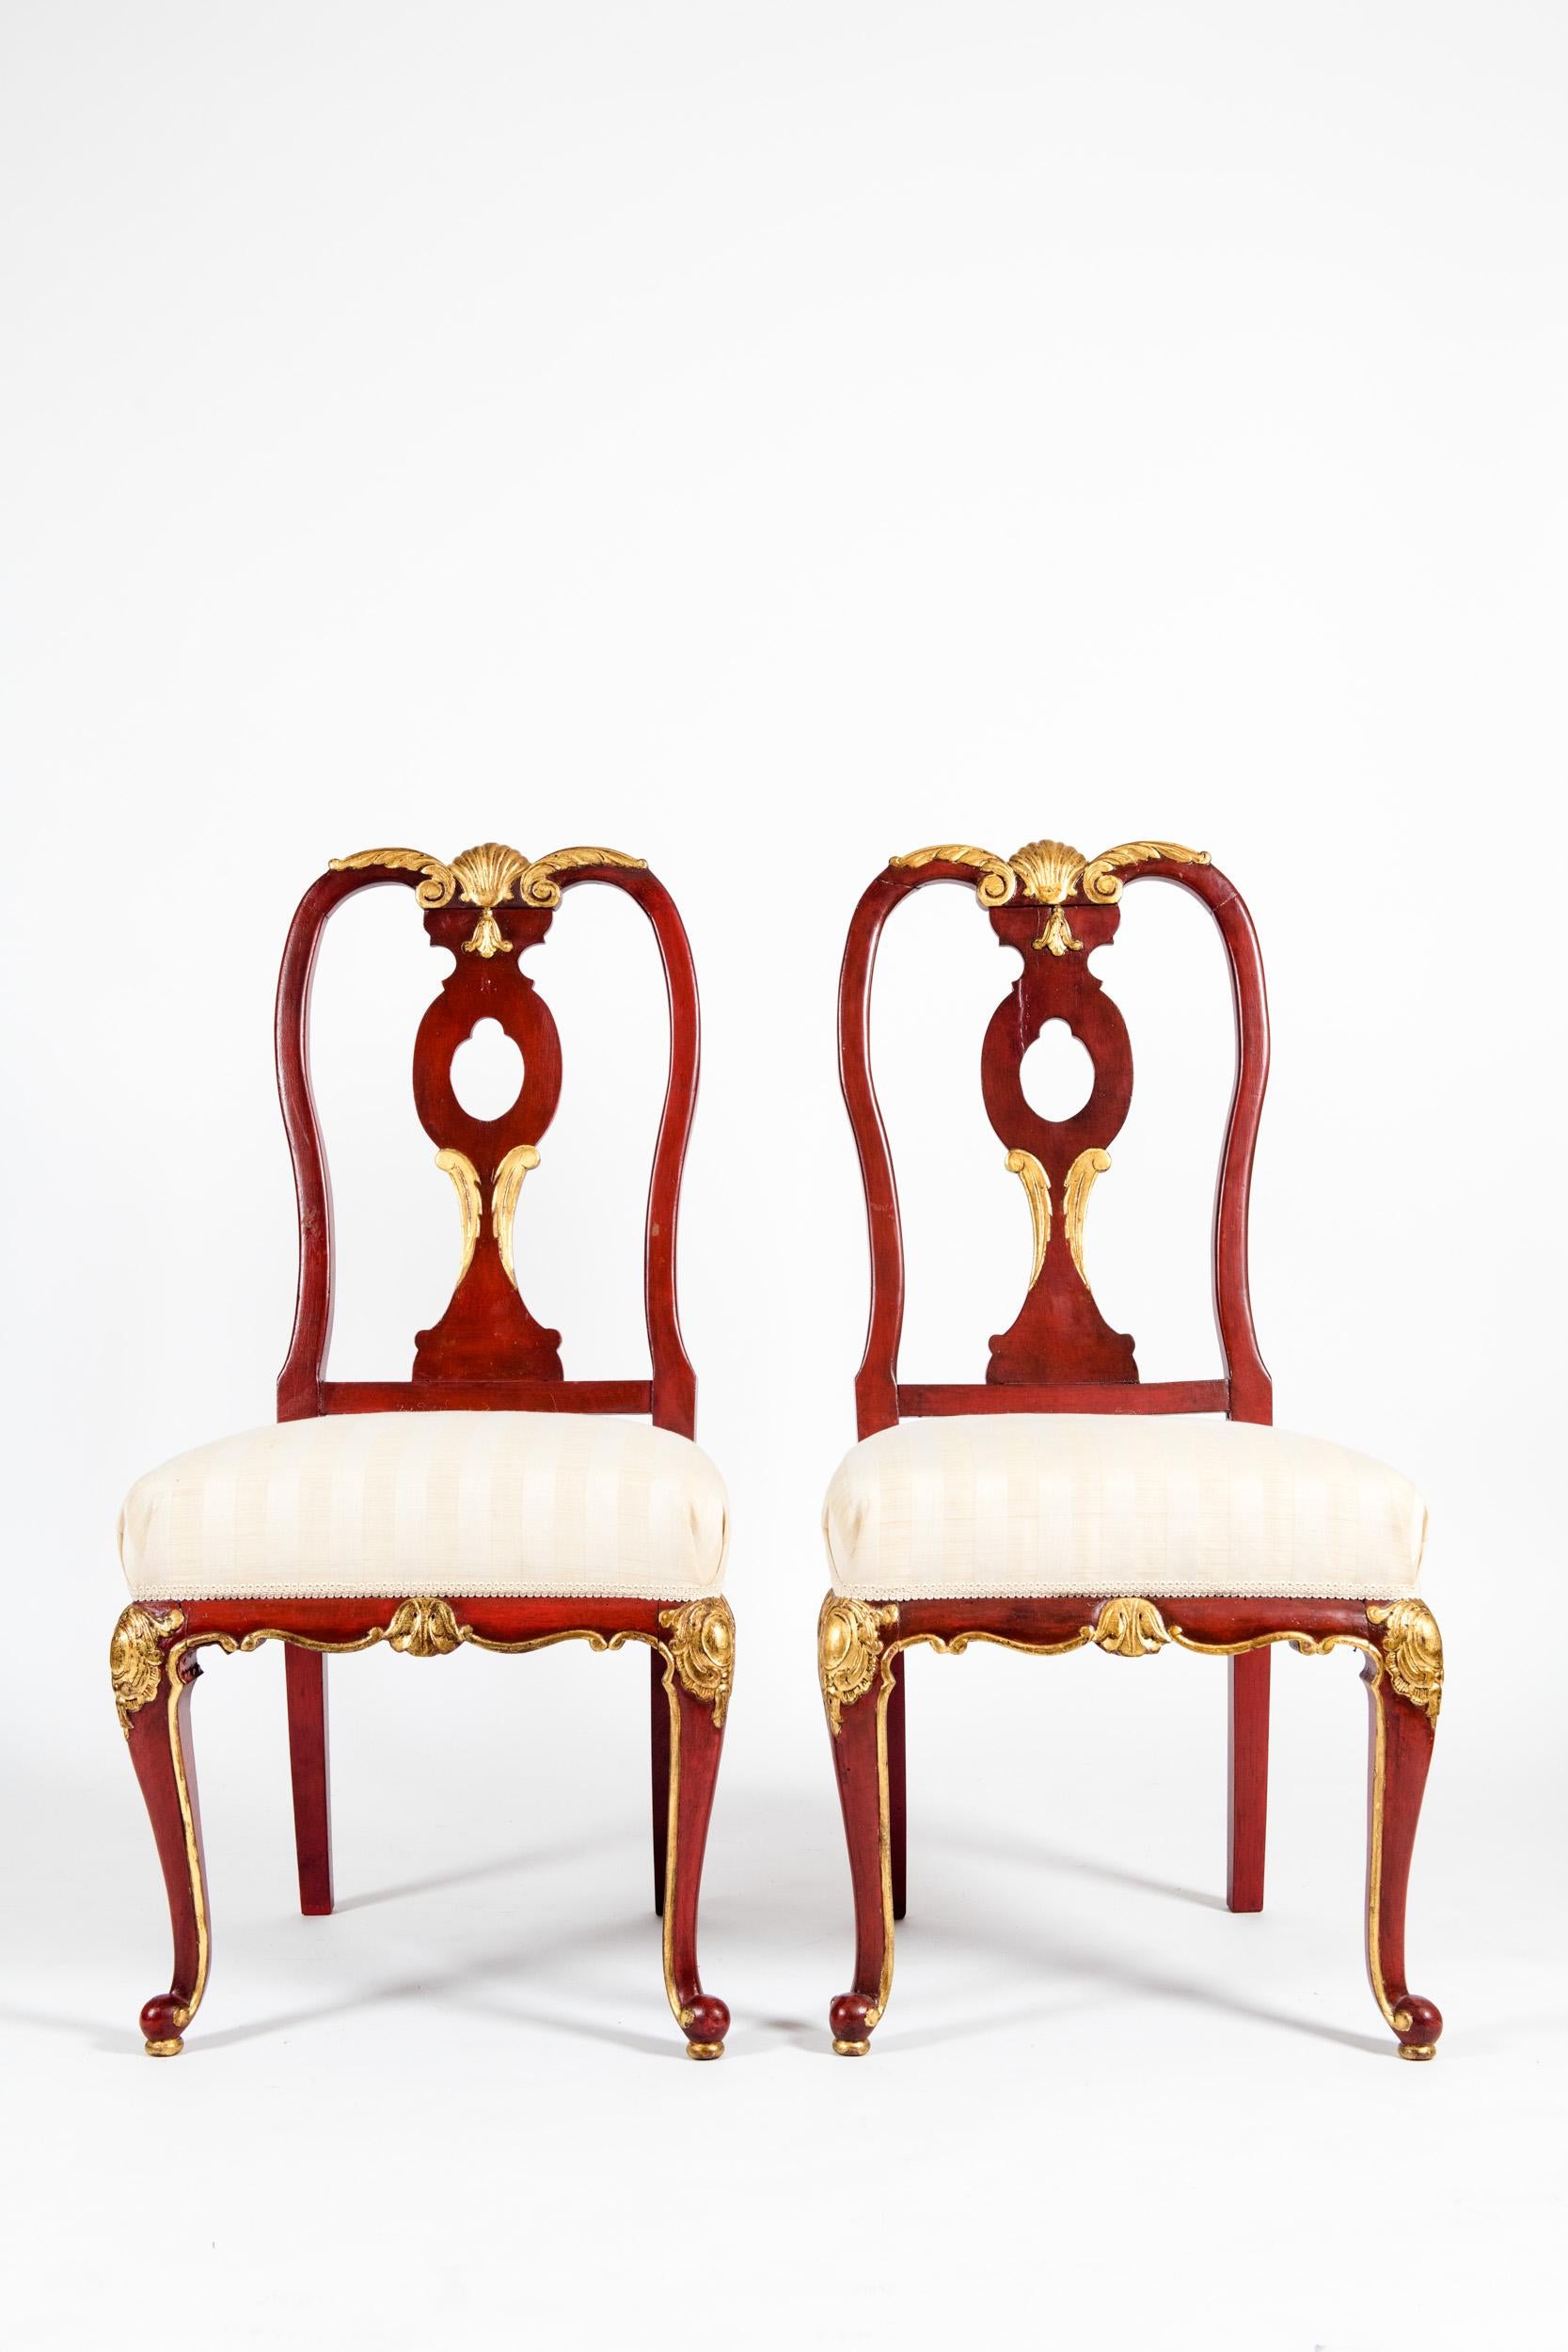 Pair wood framed with gilt design details continental side chairs. Each chairs is in great vintage condition. Minor wear consistent with age or use. Each chair measure about 39 inches high x 18.5 wide x 16 inches deep, seat high 17 inches.